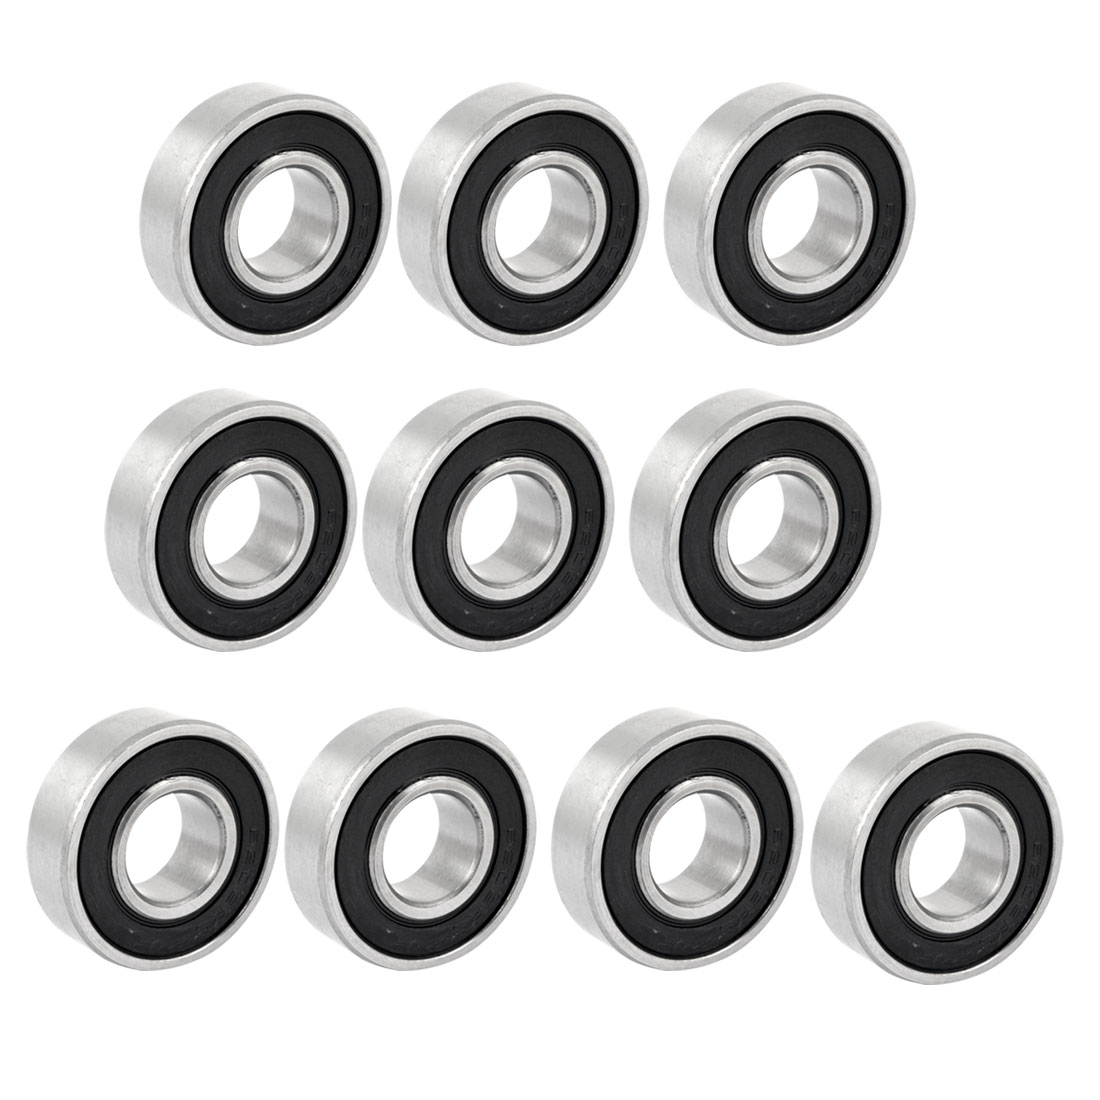 Unique Bargains 15 Inner Dia 35mm OD 11mm Thickness Deep Groove Ball Bearings 6202RS